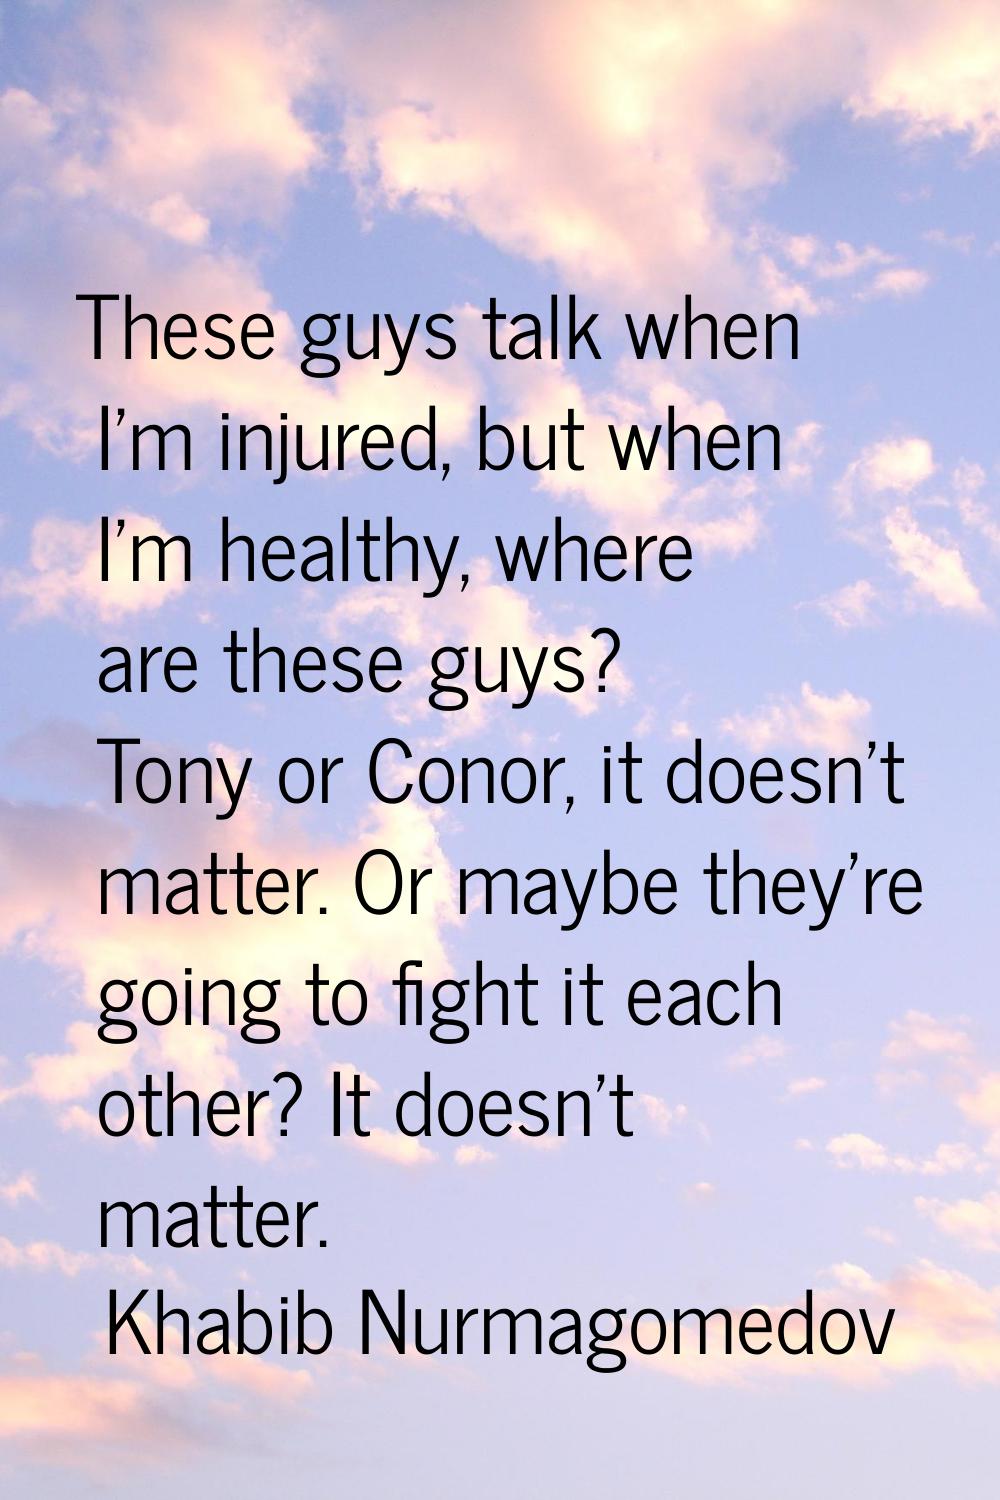 These guys talk when I'm injured, but when I'm healthy, where are these guys? Tony or Conor, it doe